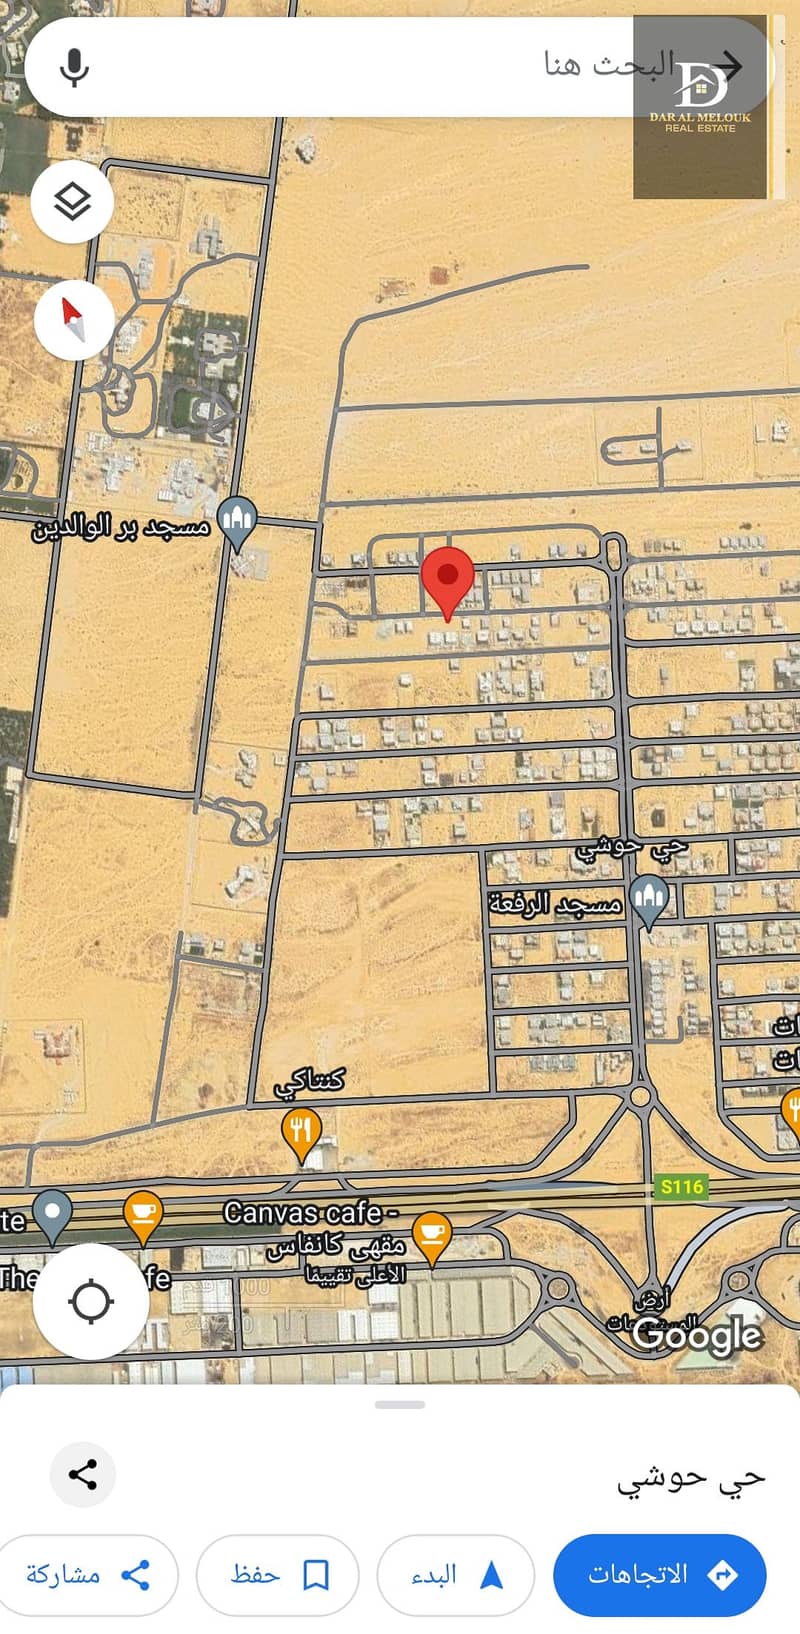 For sale in Sharjah, Al-Hoshi area, residential and investment land, area of ​​5100 feet, a permit for a ground and first villa, and it states that 50% of the surface of the land is ready for construction, directly on Jar Street, towards Al-Nouf, close to